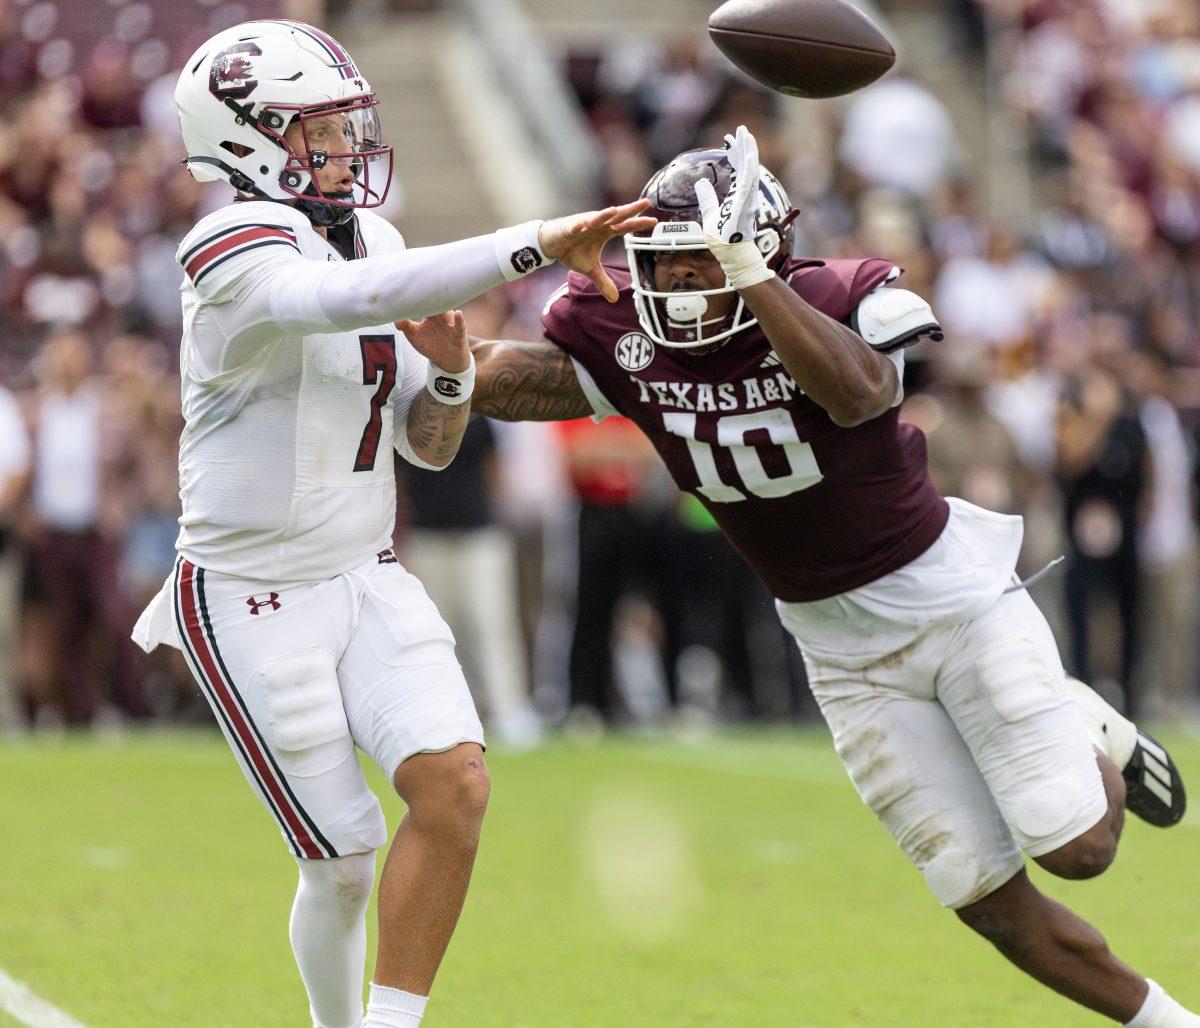 unior DL Fadil Diggs (10) attempts to sack South Carolina QB Spencer Rattler (7) during Texas A&Ms game against South Carolina on Saturday, Oct. 28, 2023 at Kyle Field (Katelynn Ivy/The Battalion).